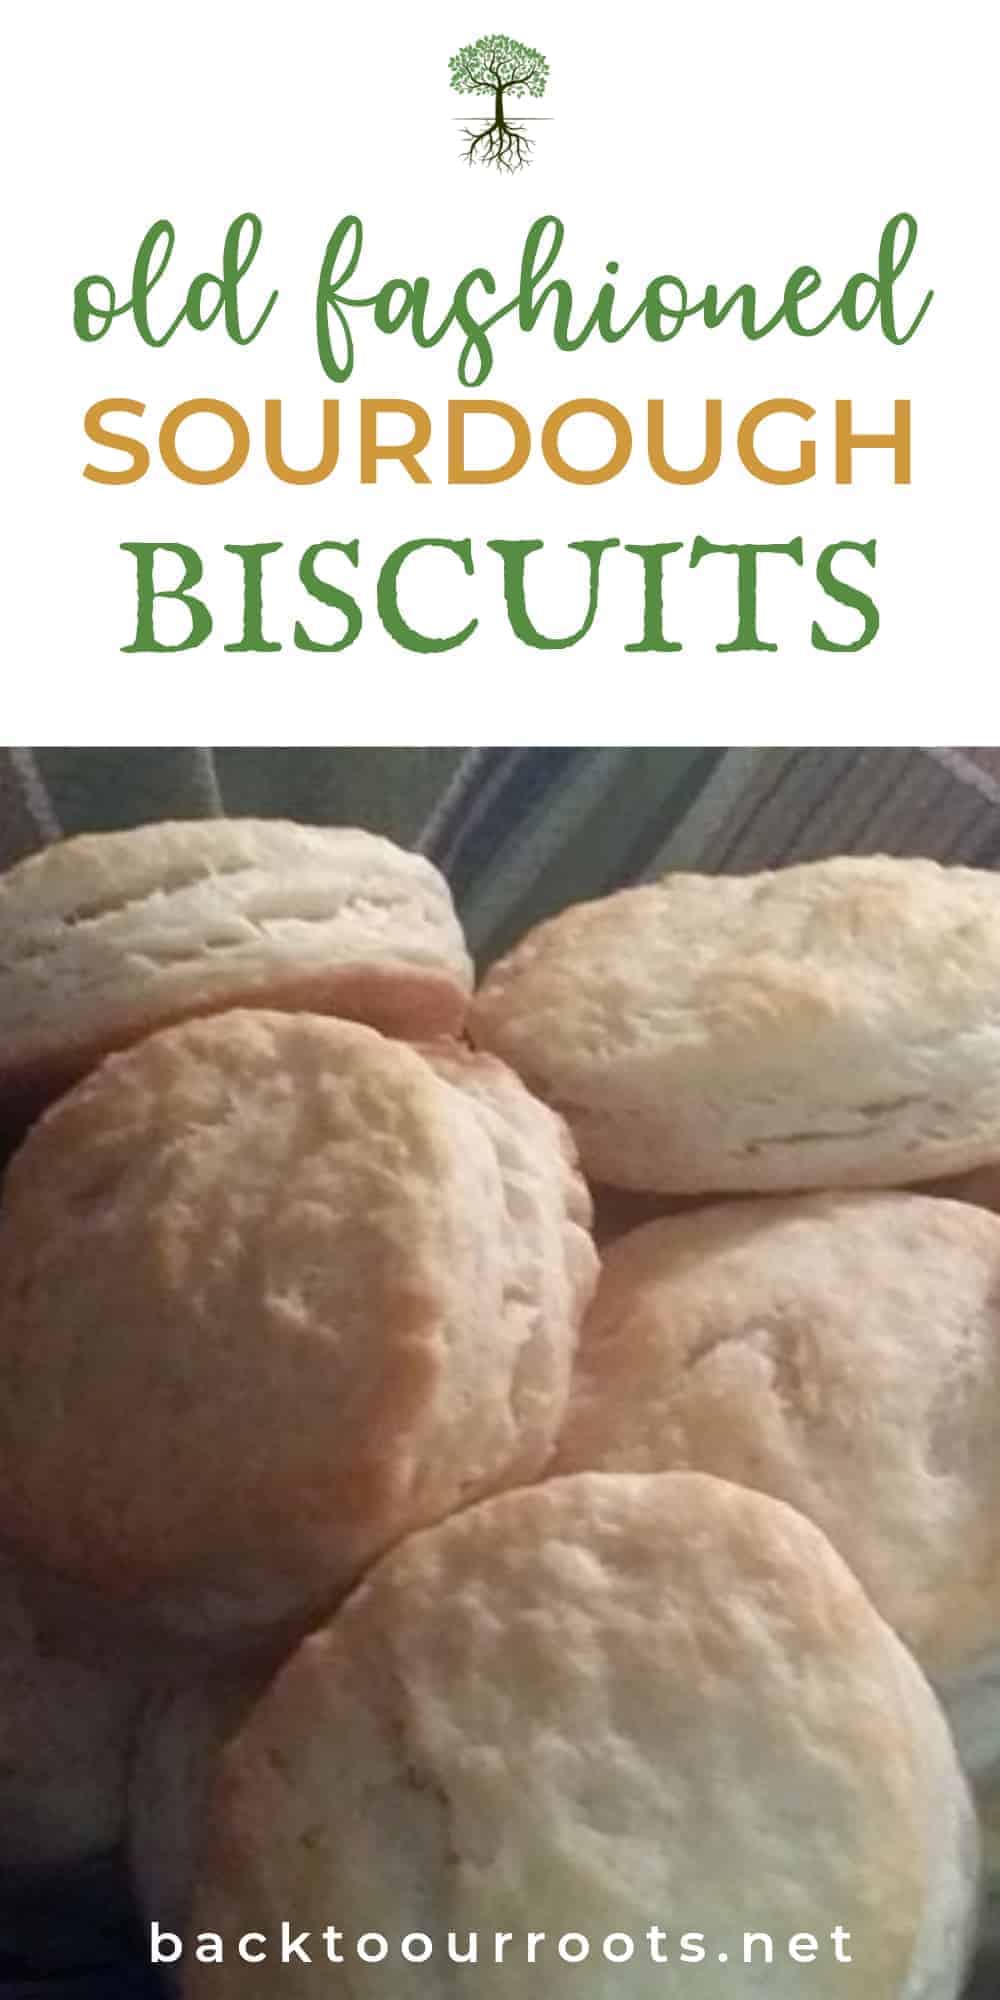 Old Fashioned Sourdough Biscuits